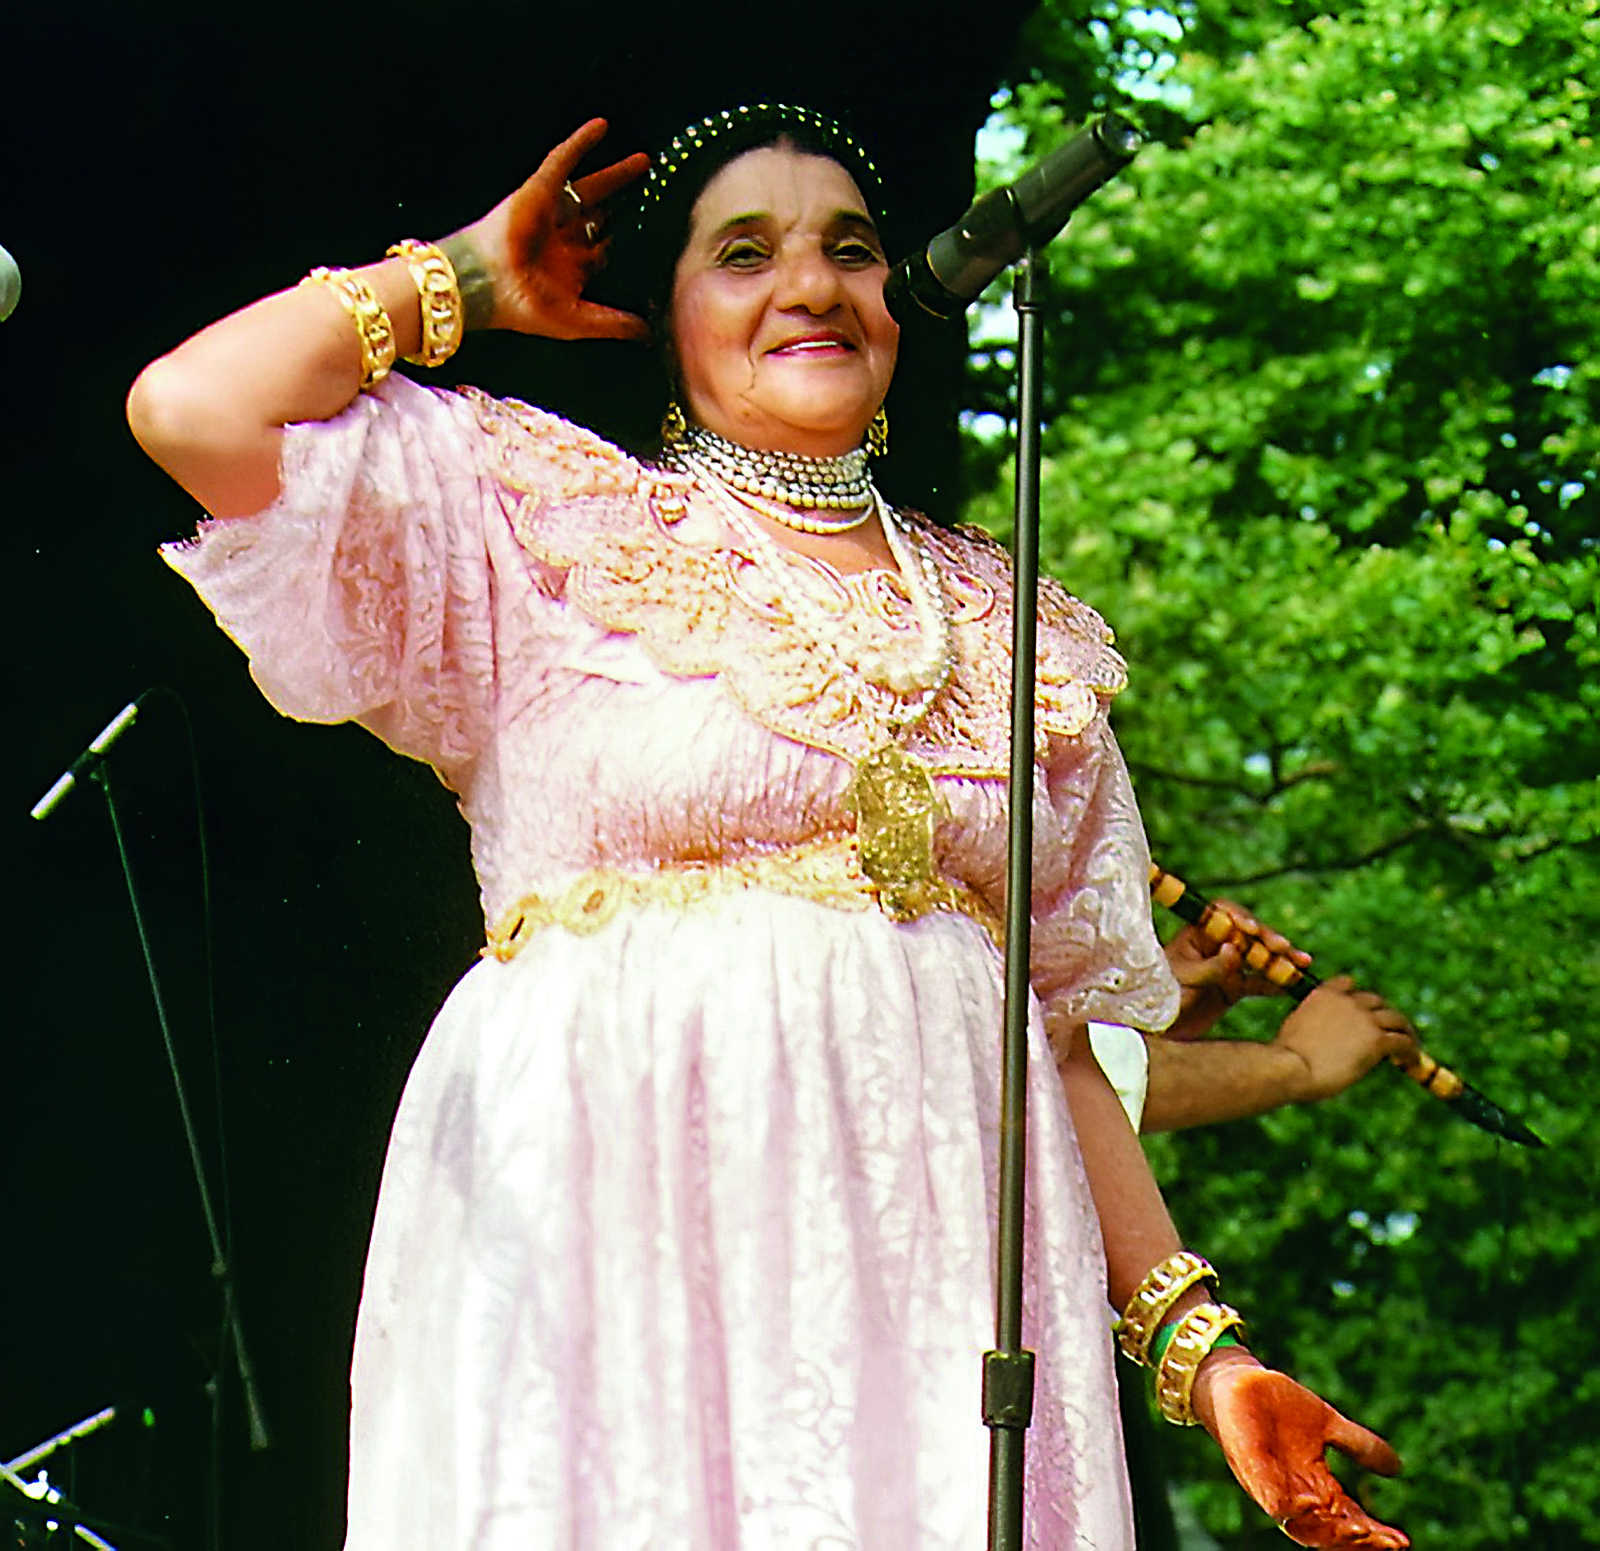 As her fame grew internationally, Remitti continued to perform wearing traditional Bedouin Algerian dresses, glittering gold shoes, gold jewelry and henna on both palms. By the early 2000s, she was well-known in Europe, and her first performance in the US came in the summer of 2002, where she appeared on an outdoor stage in New York’s Central Park. 